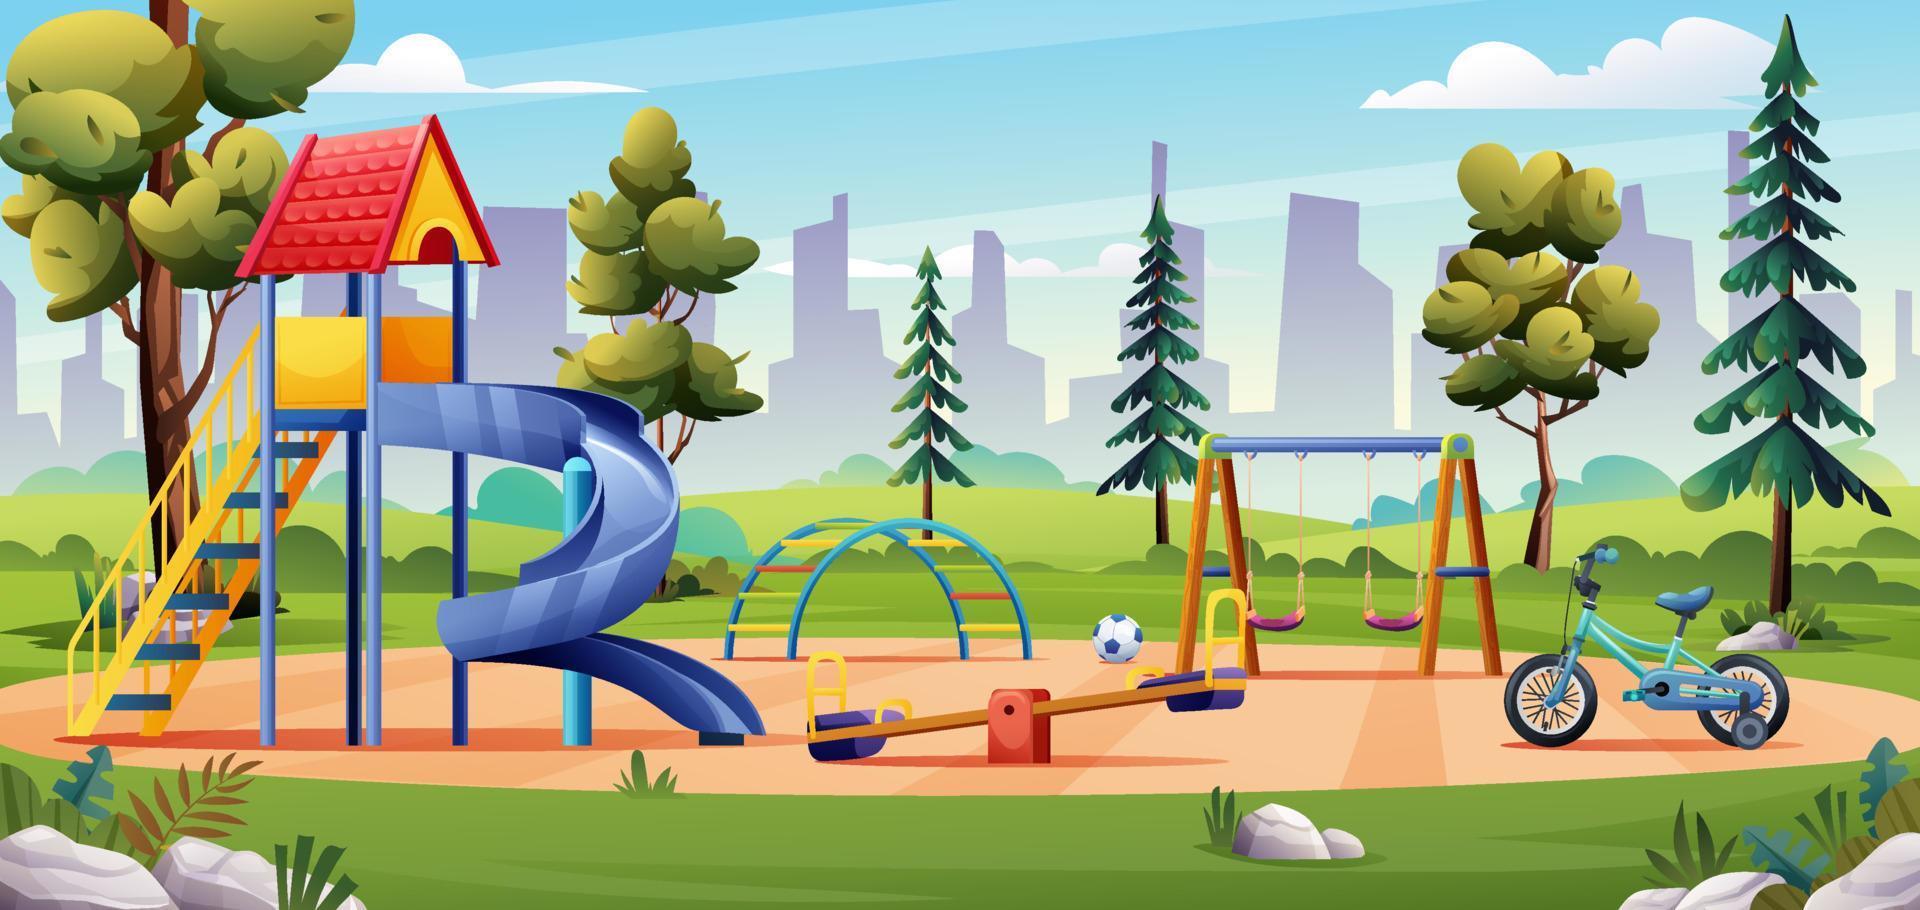 Kids playground landscape with slide, swing, bicycle and seesaw cartoon illustration vector